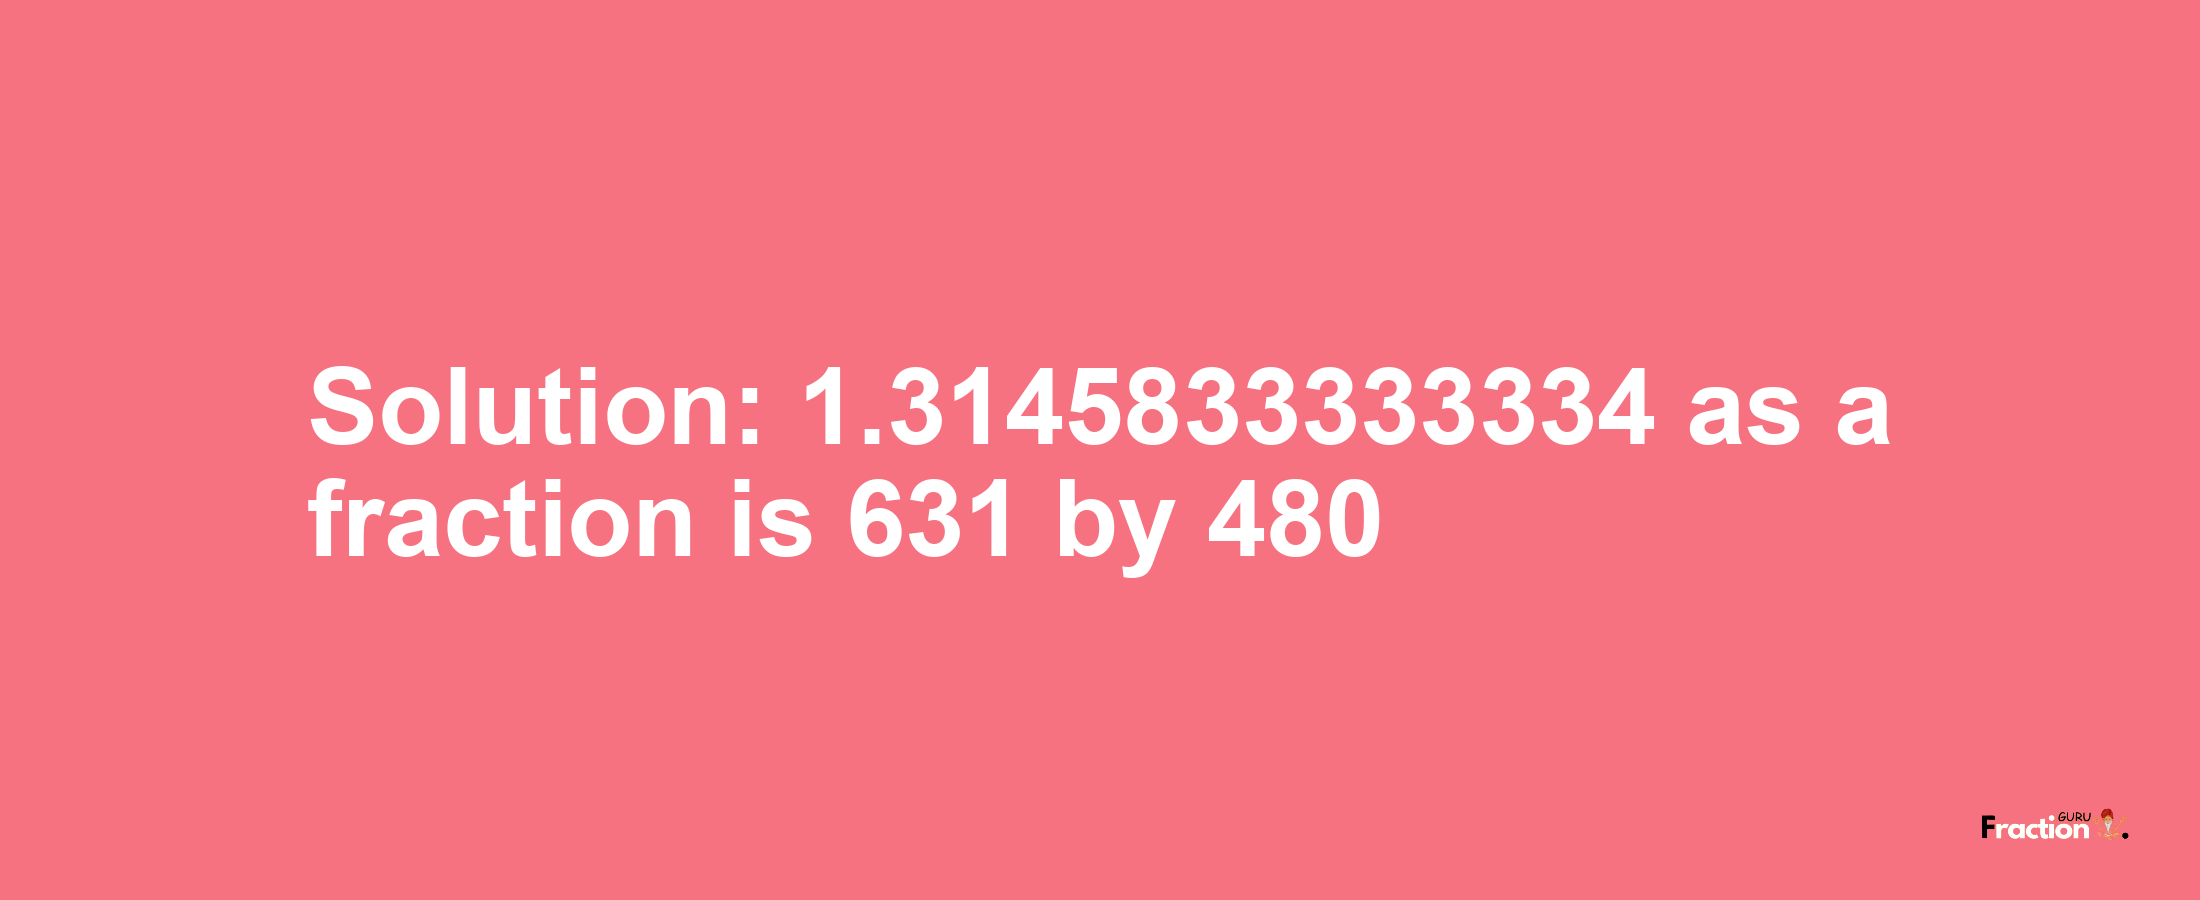 Solution:1.3145833333334 as a fraction is 631/480